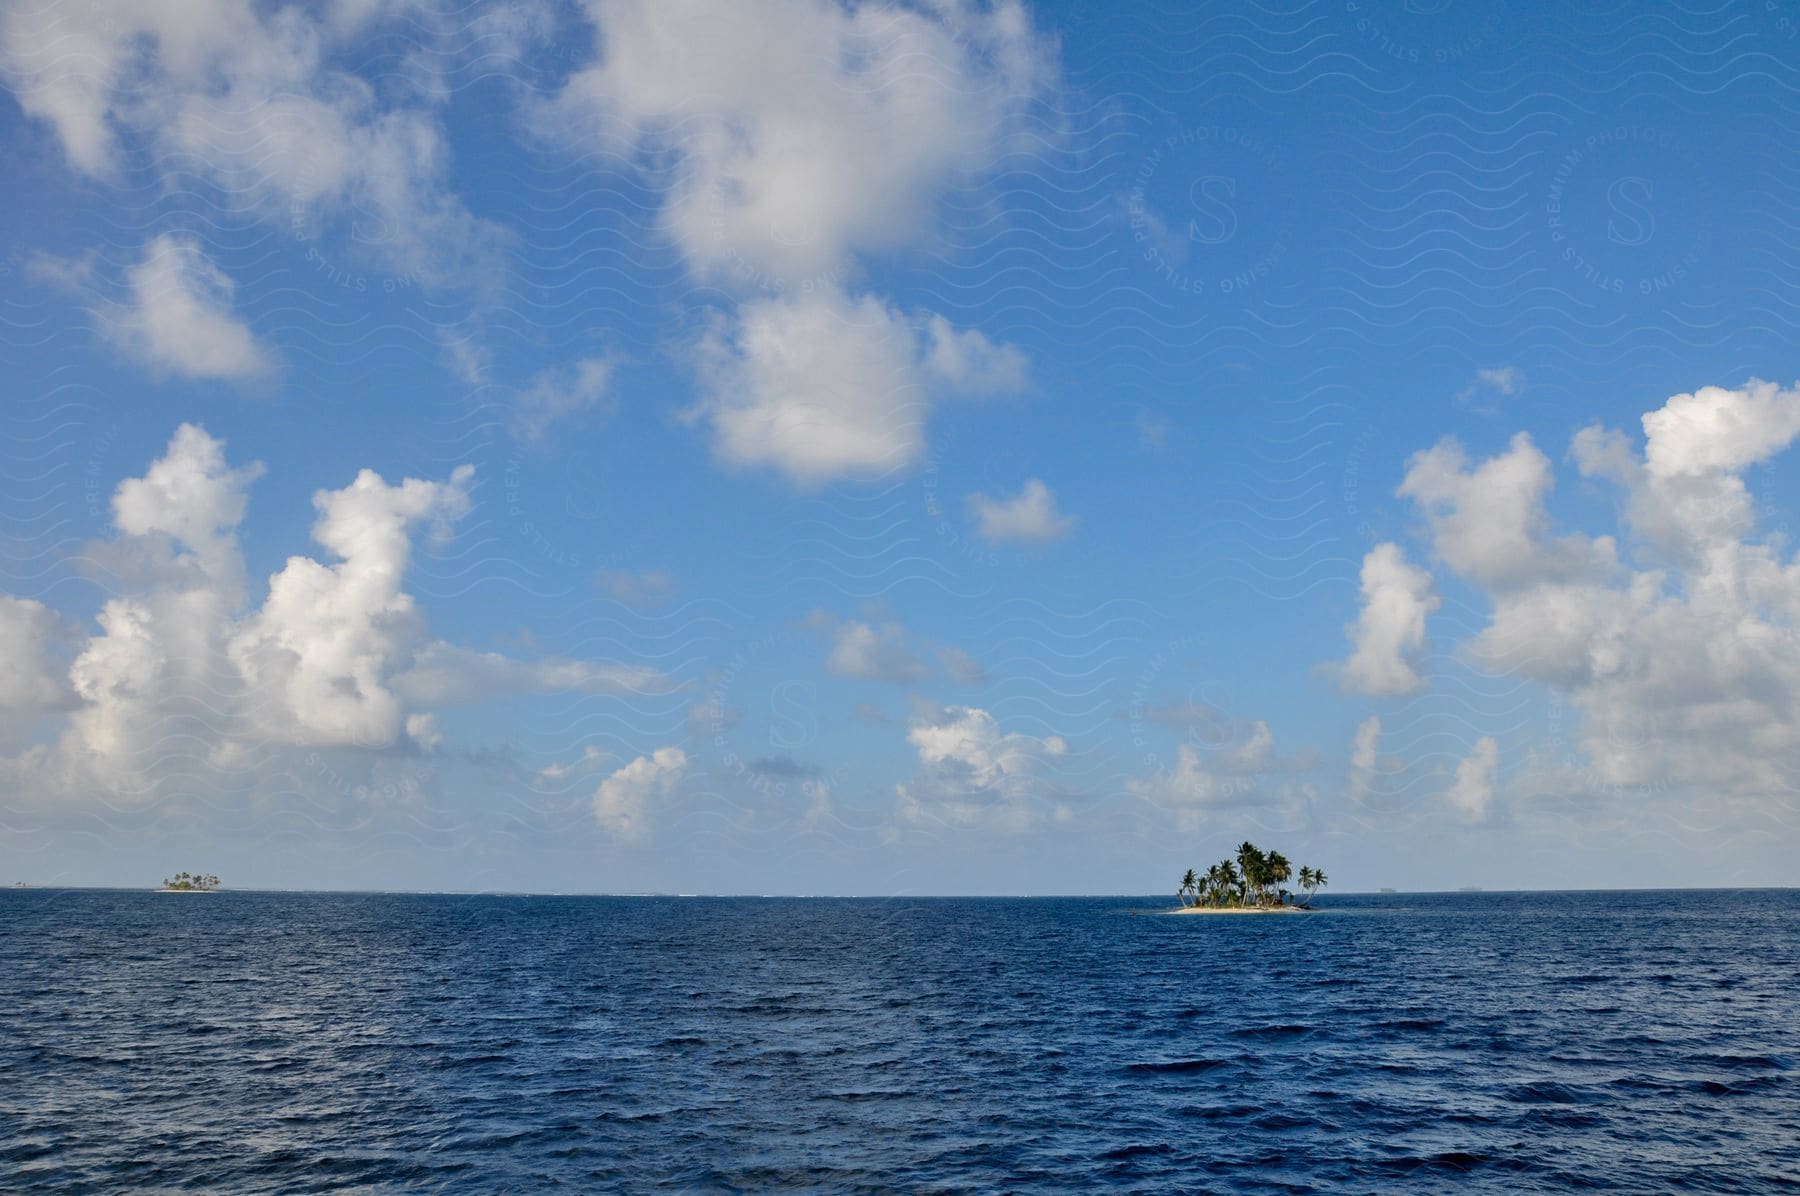 Trees on small islands in the open sea under a blue cloudy sky